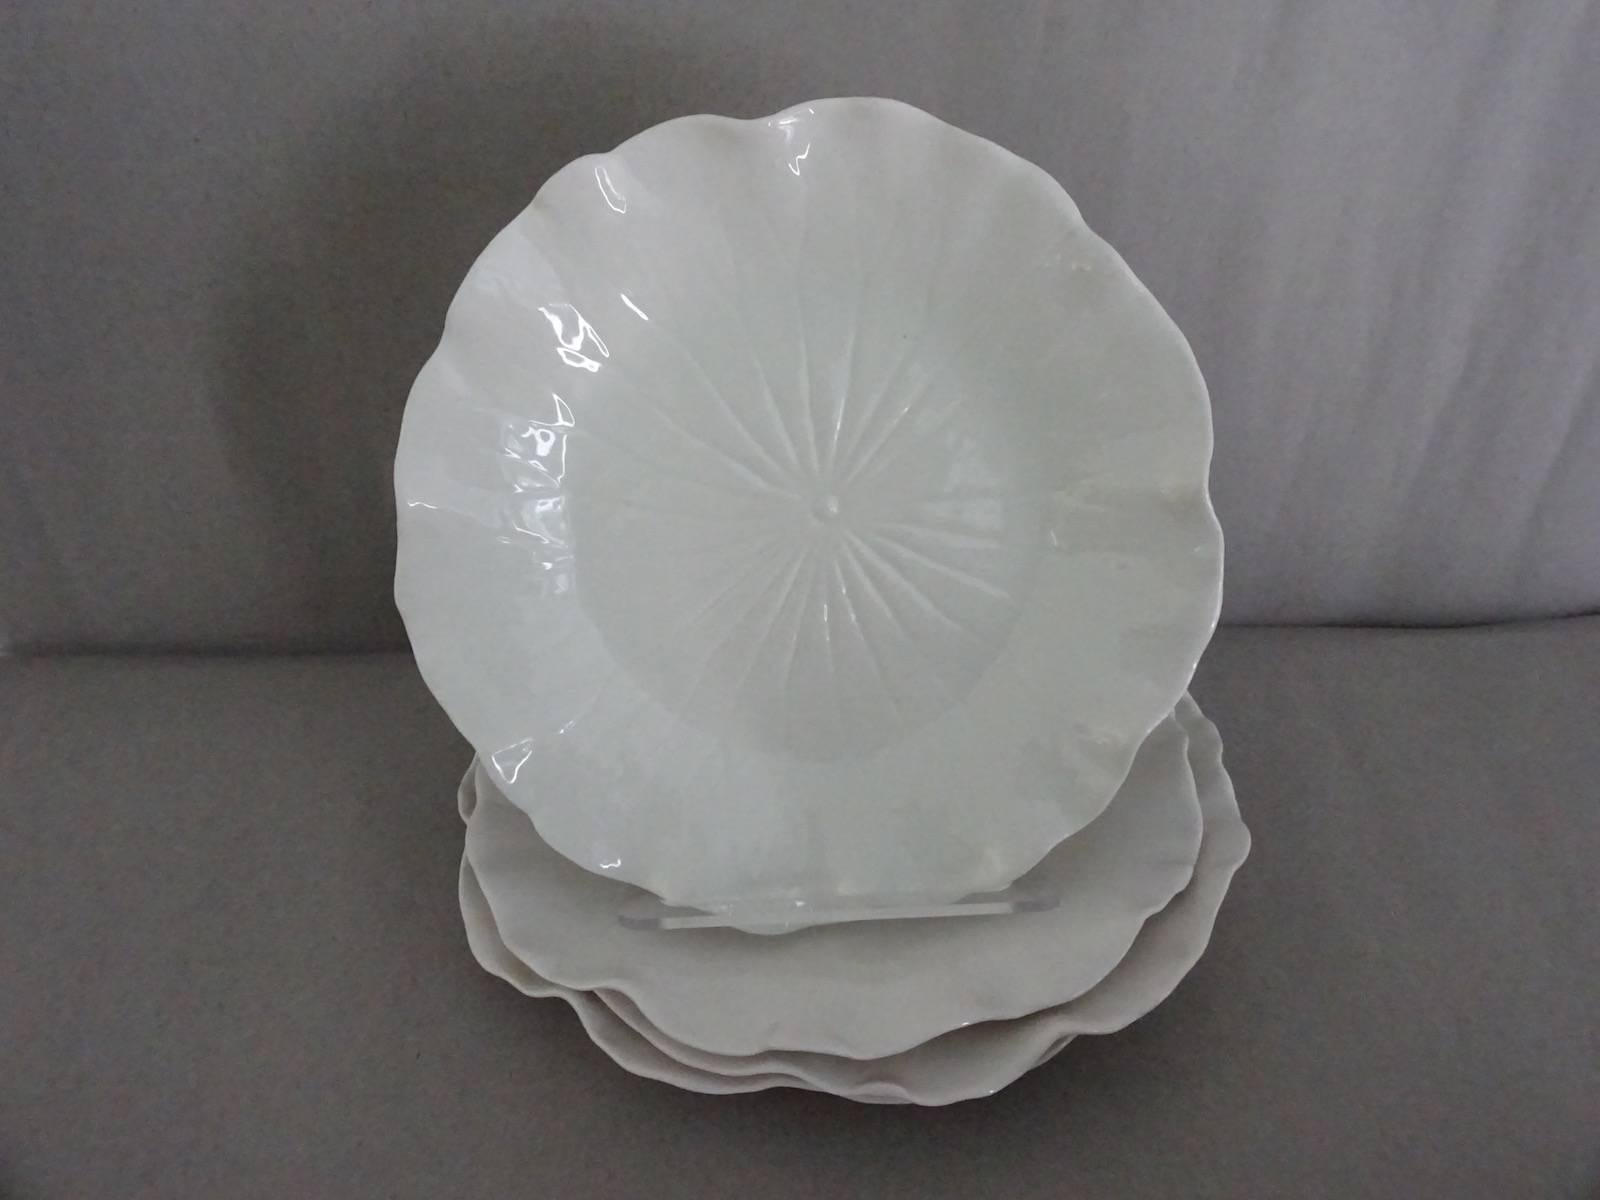 Set of ten (10) porcelain creamware lotus dessert or salad plates. No markings, but most probably modern. Probably English. Impressed porcelain to give
the feel of a real lotus leaf. Delicately made lovely thin porcelain.